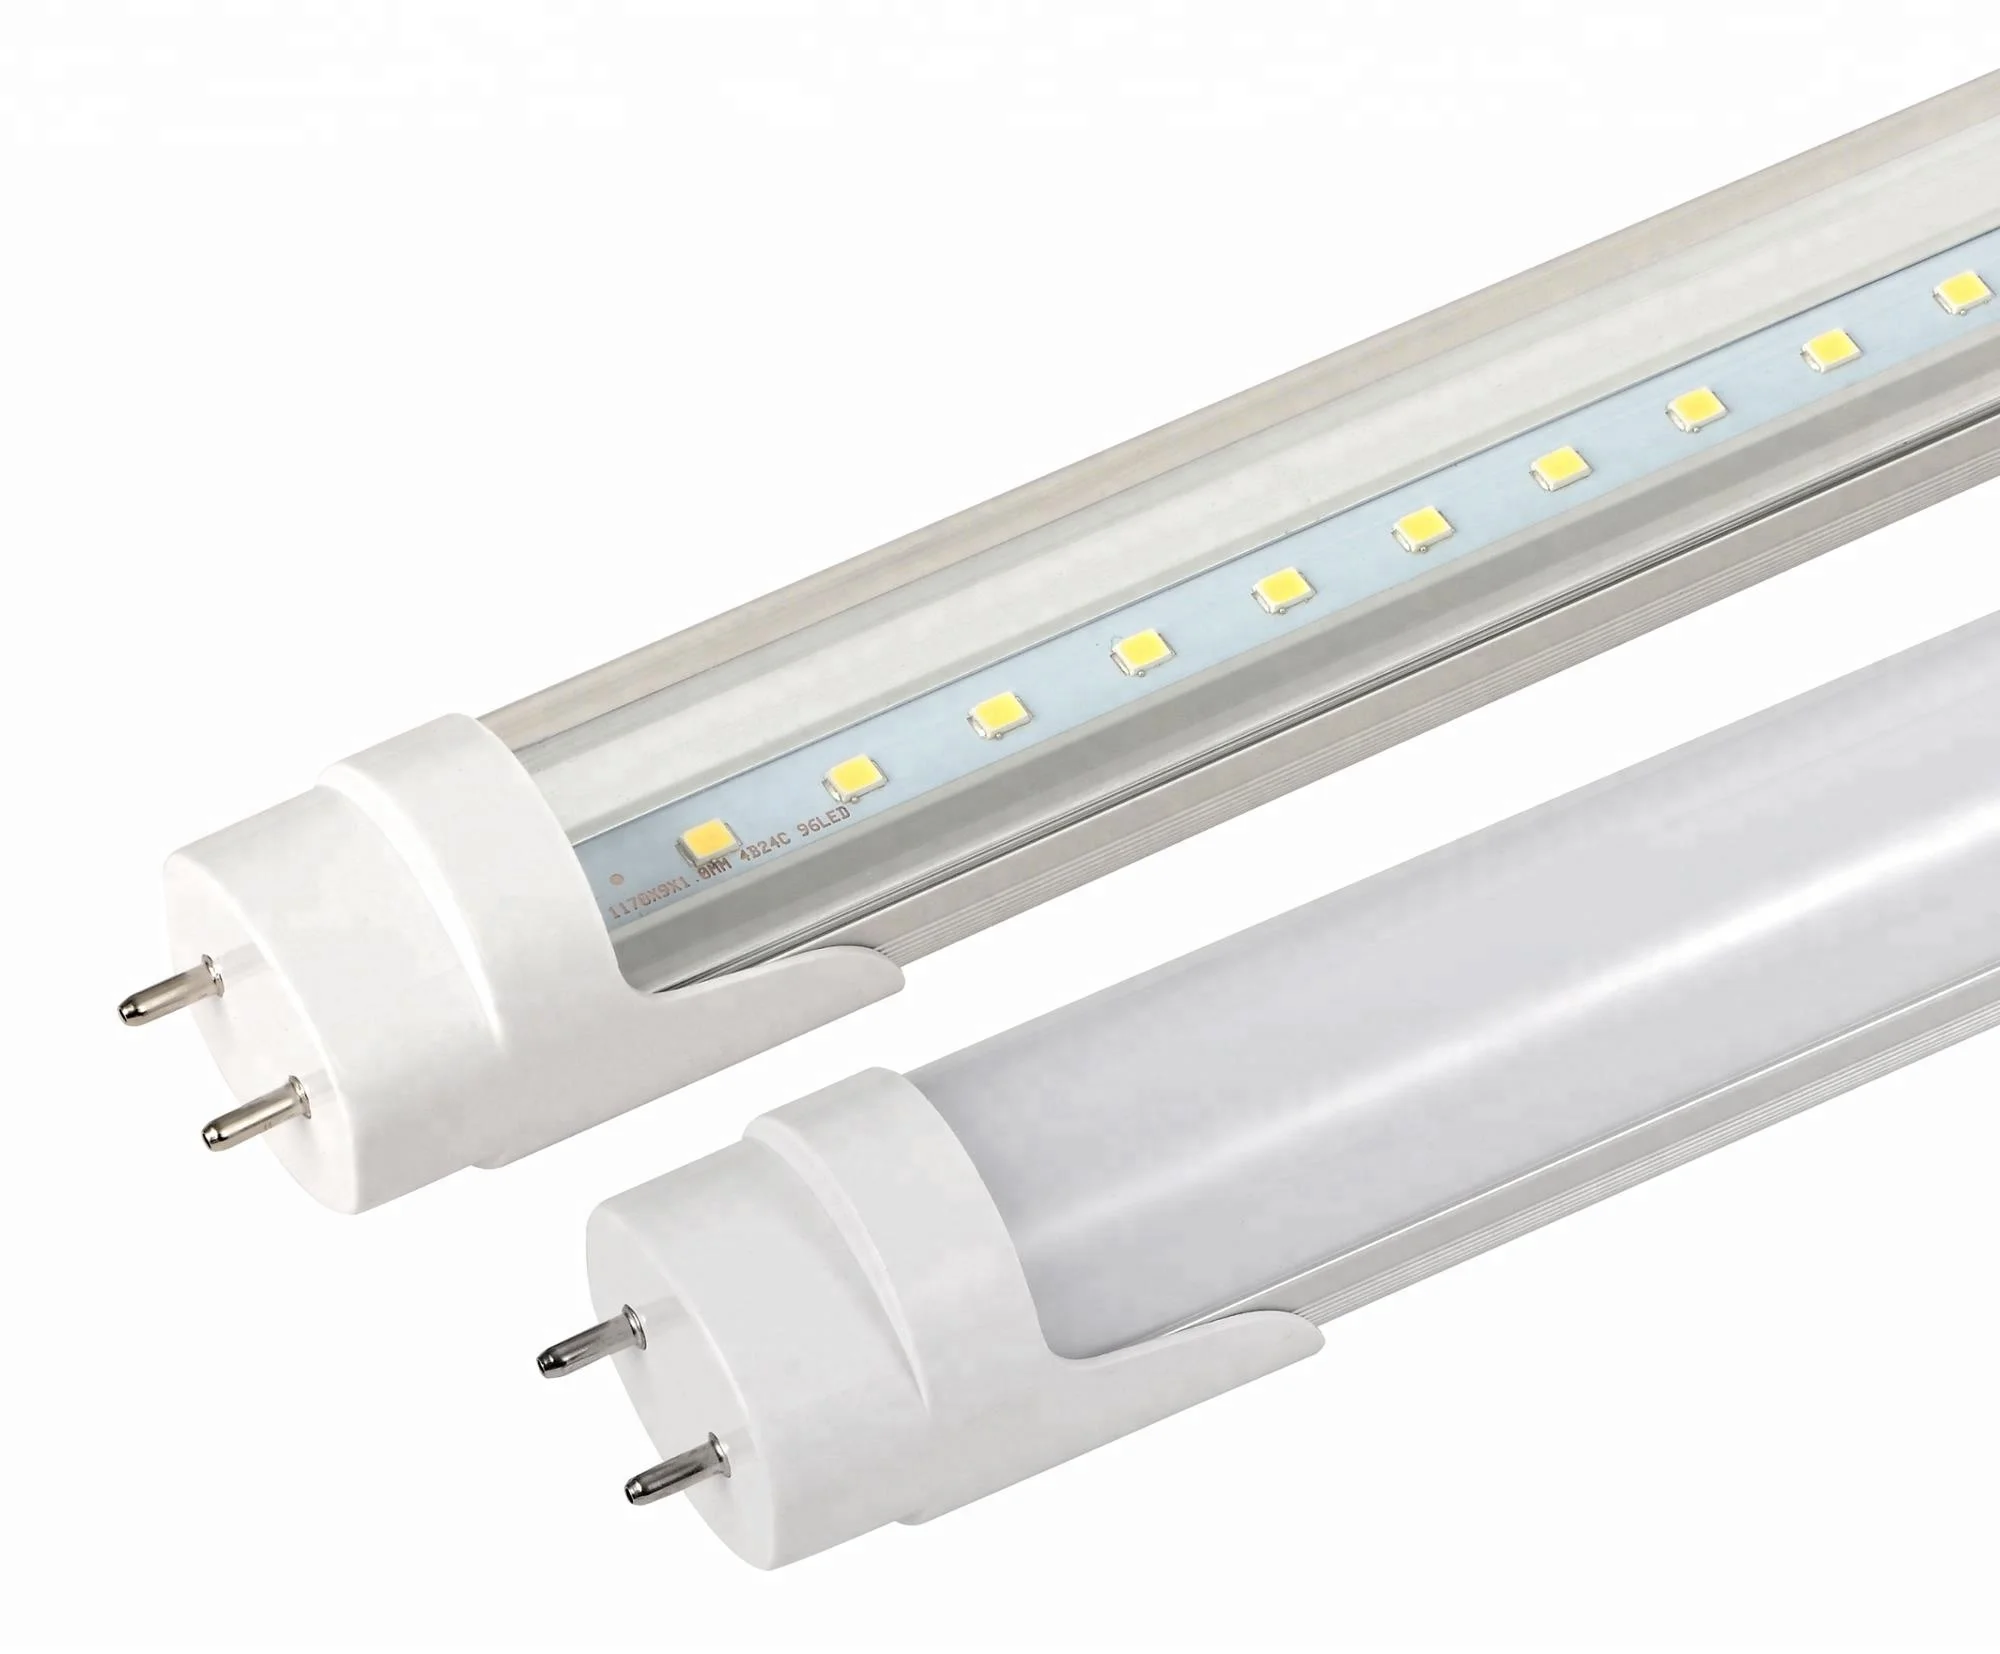 High efficient 5 years warranty T8 Linear Fluorescent Lamps 4 foot 2 foot led tube for electronic ballast DLC LISTED